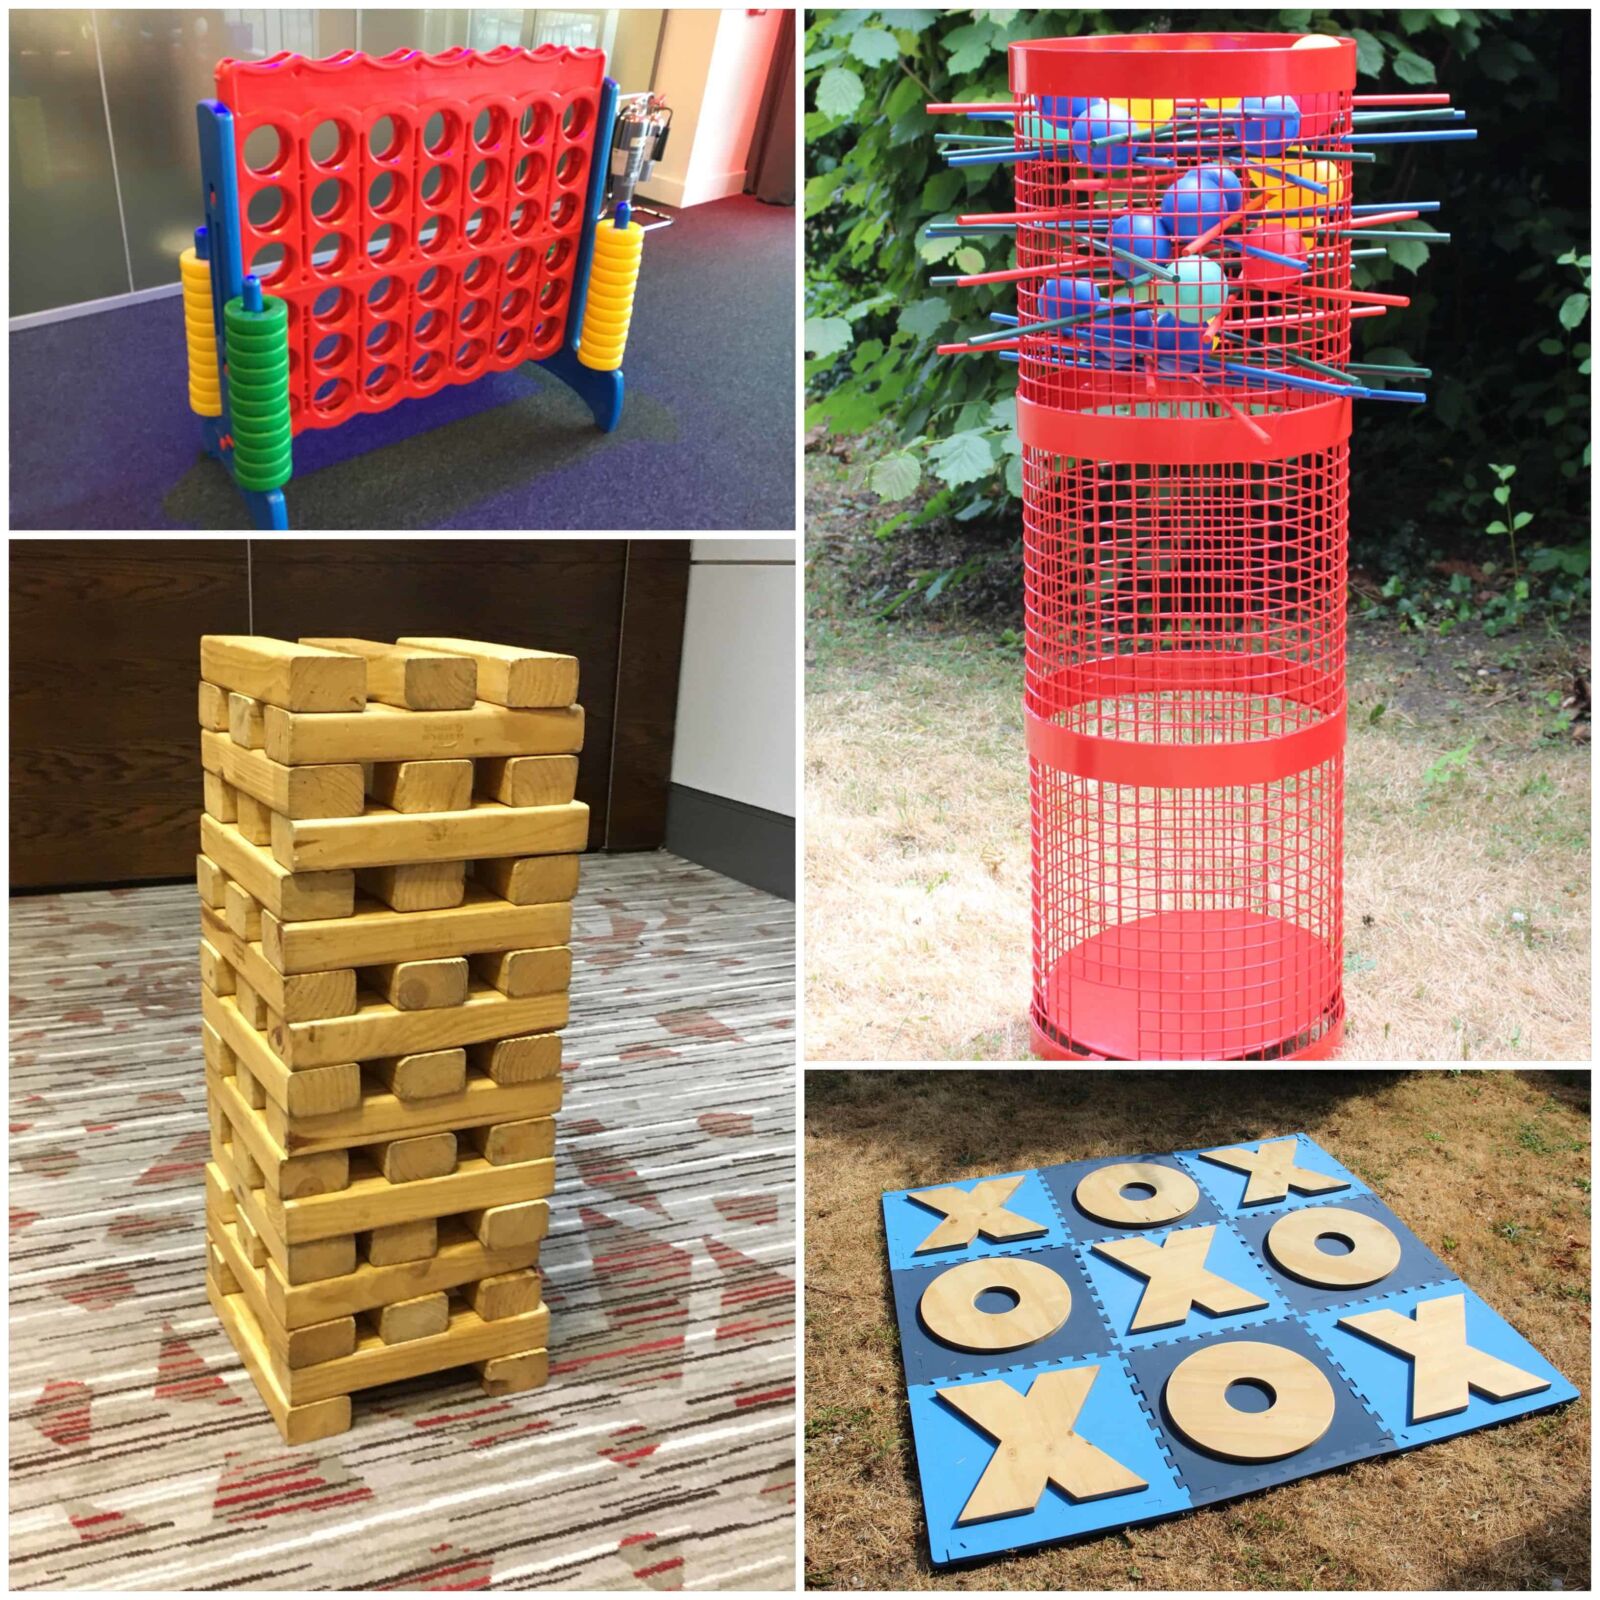 Giant Garden Games - Jenga, Connect 4 and Noughts & Crosses